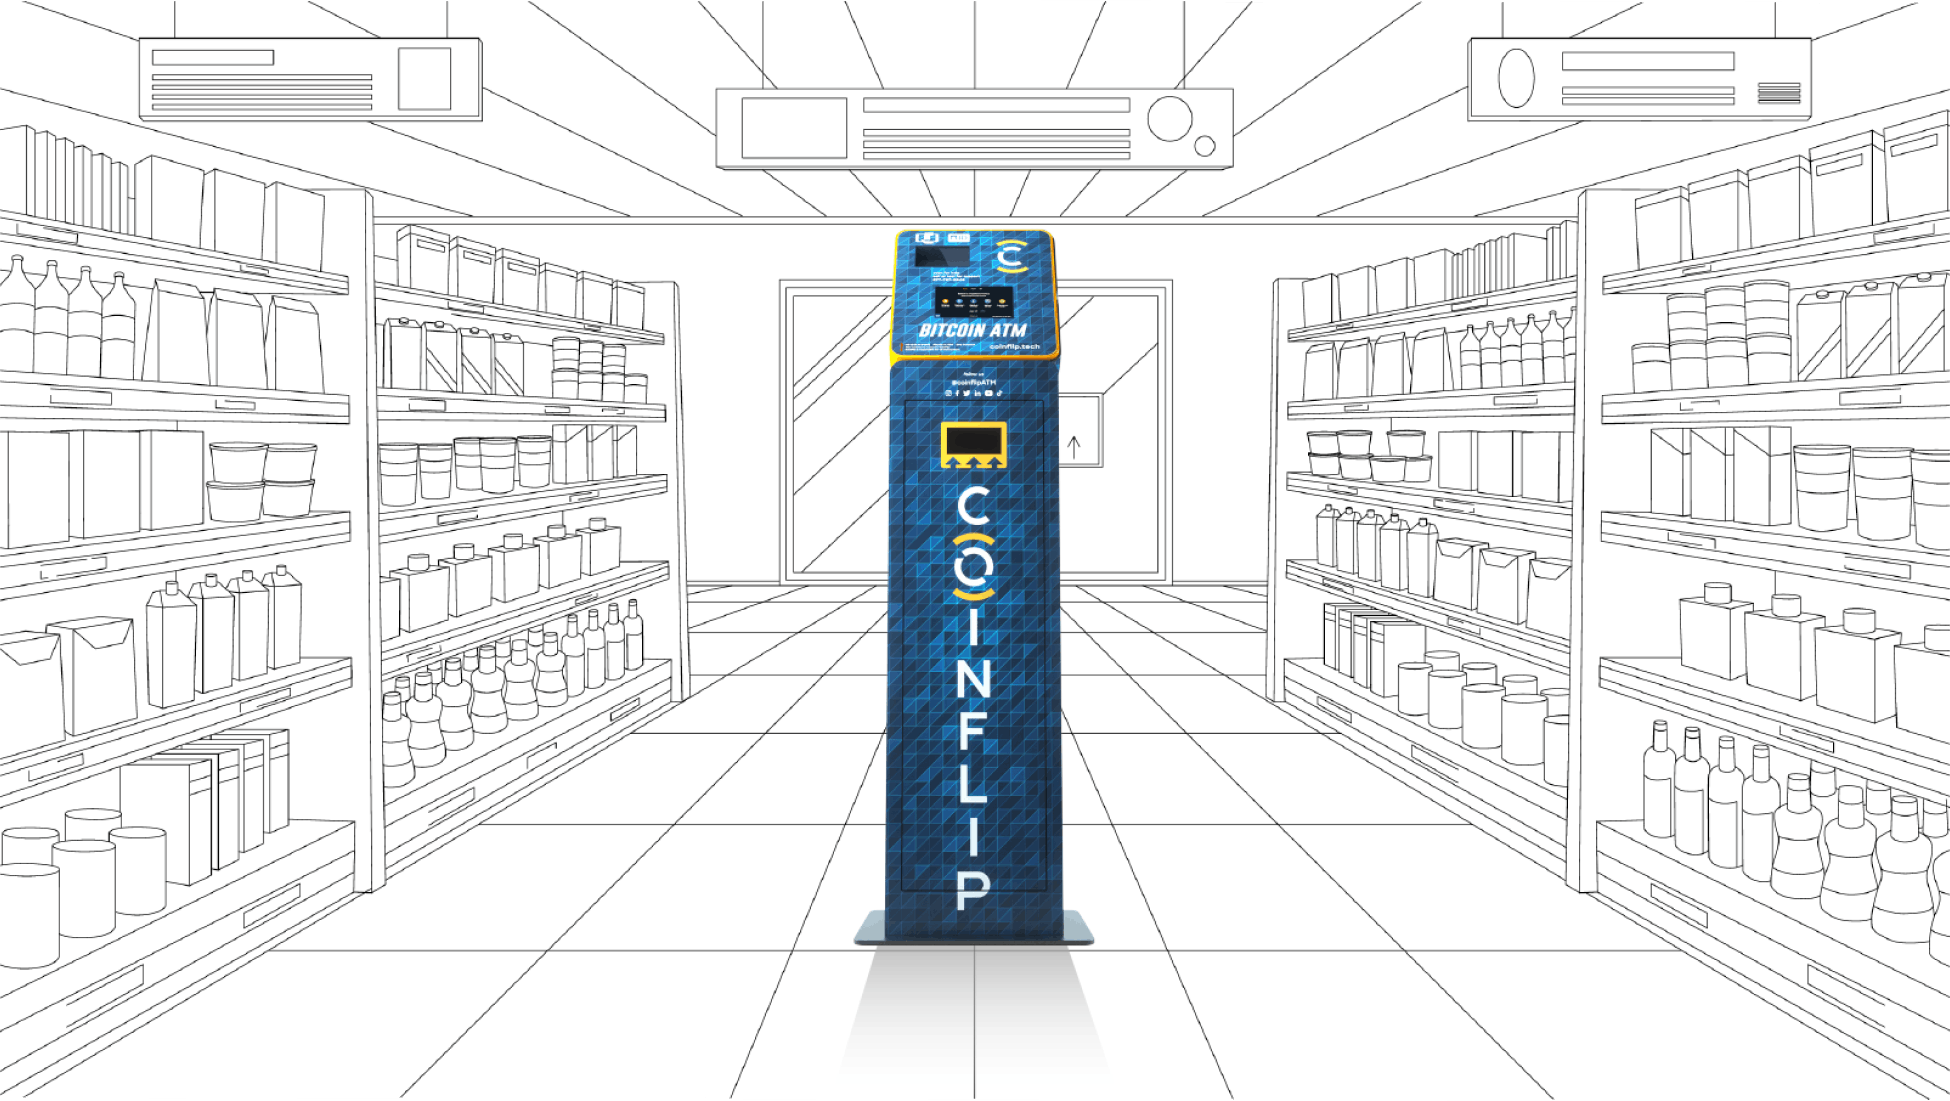 Black and white sketch of a store with CoinFlip kiosk in color